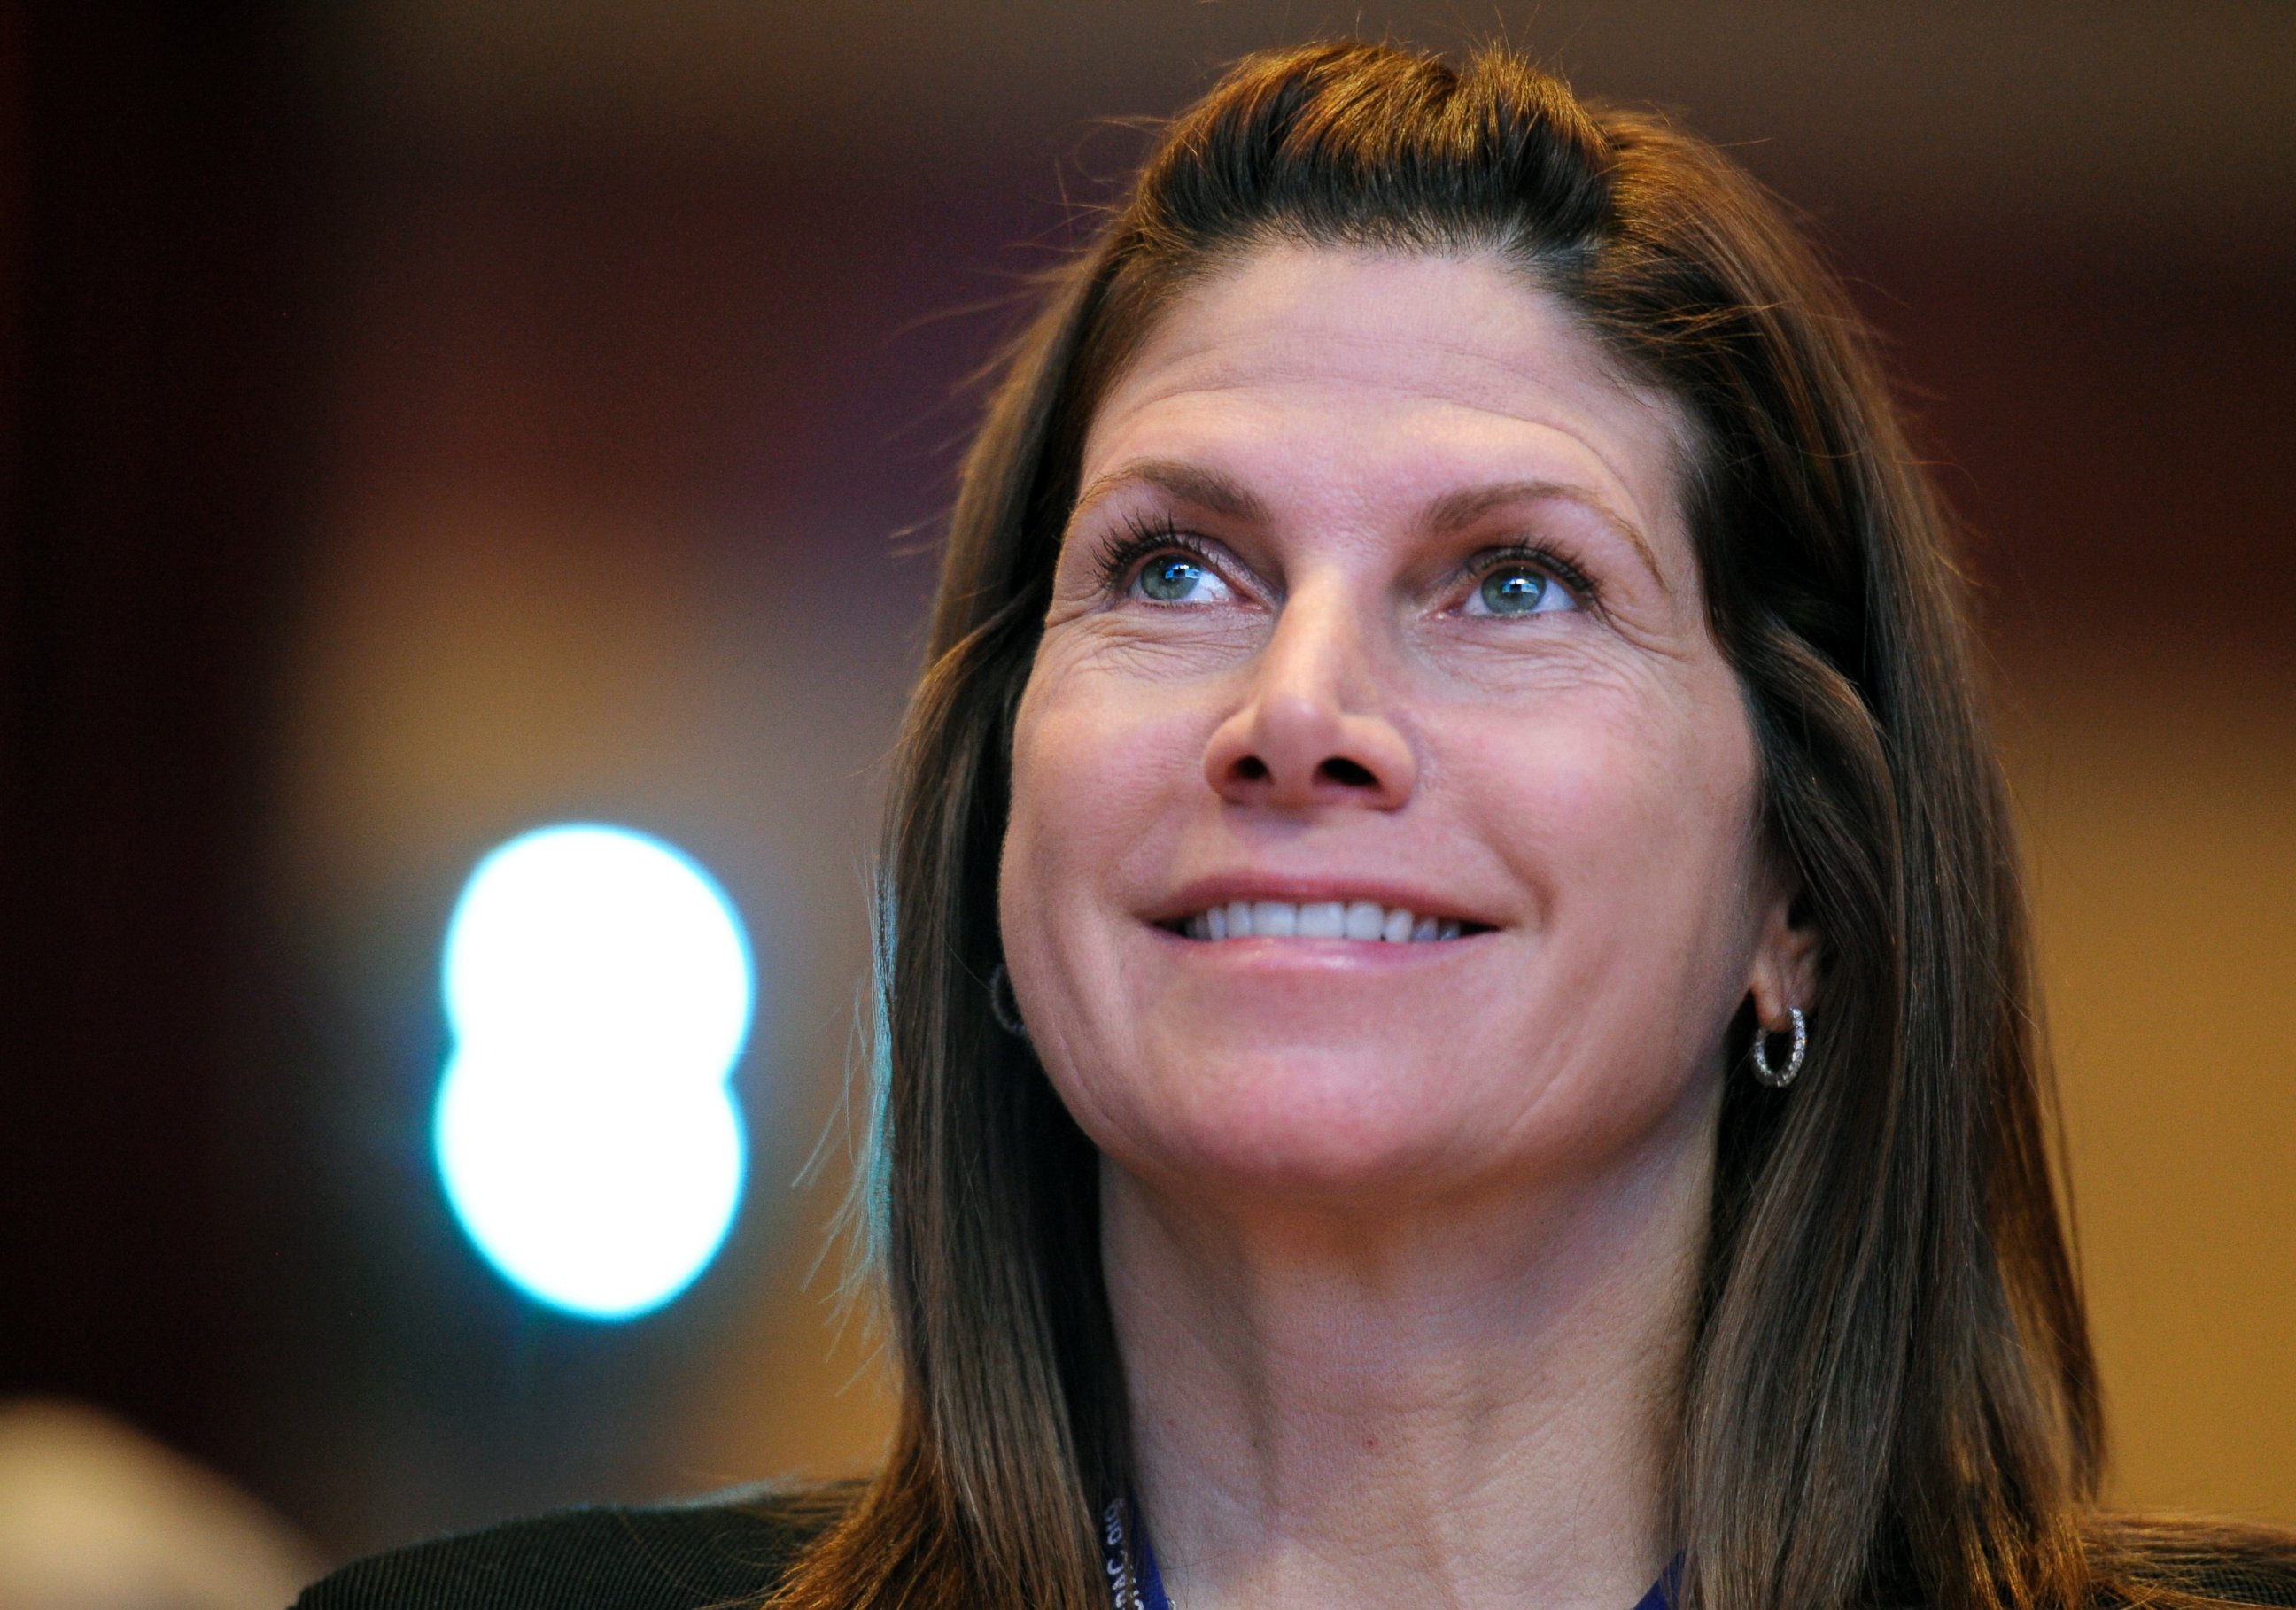 PHOTO: In this Feb. 12, 2011, file photo, then-Rep. Mary Bono, R-Calif., listens at the Conservative Political Action Conference (CPAC) in Washington.